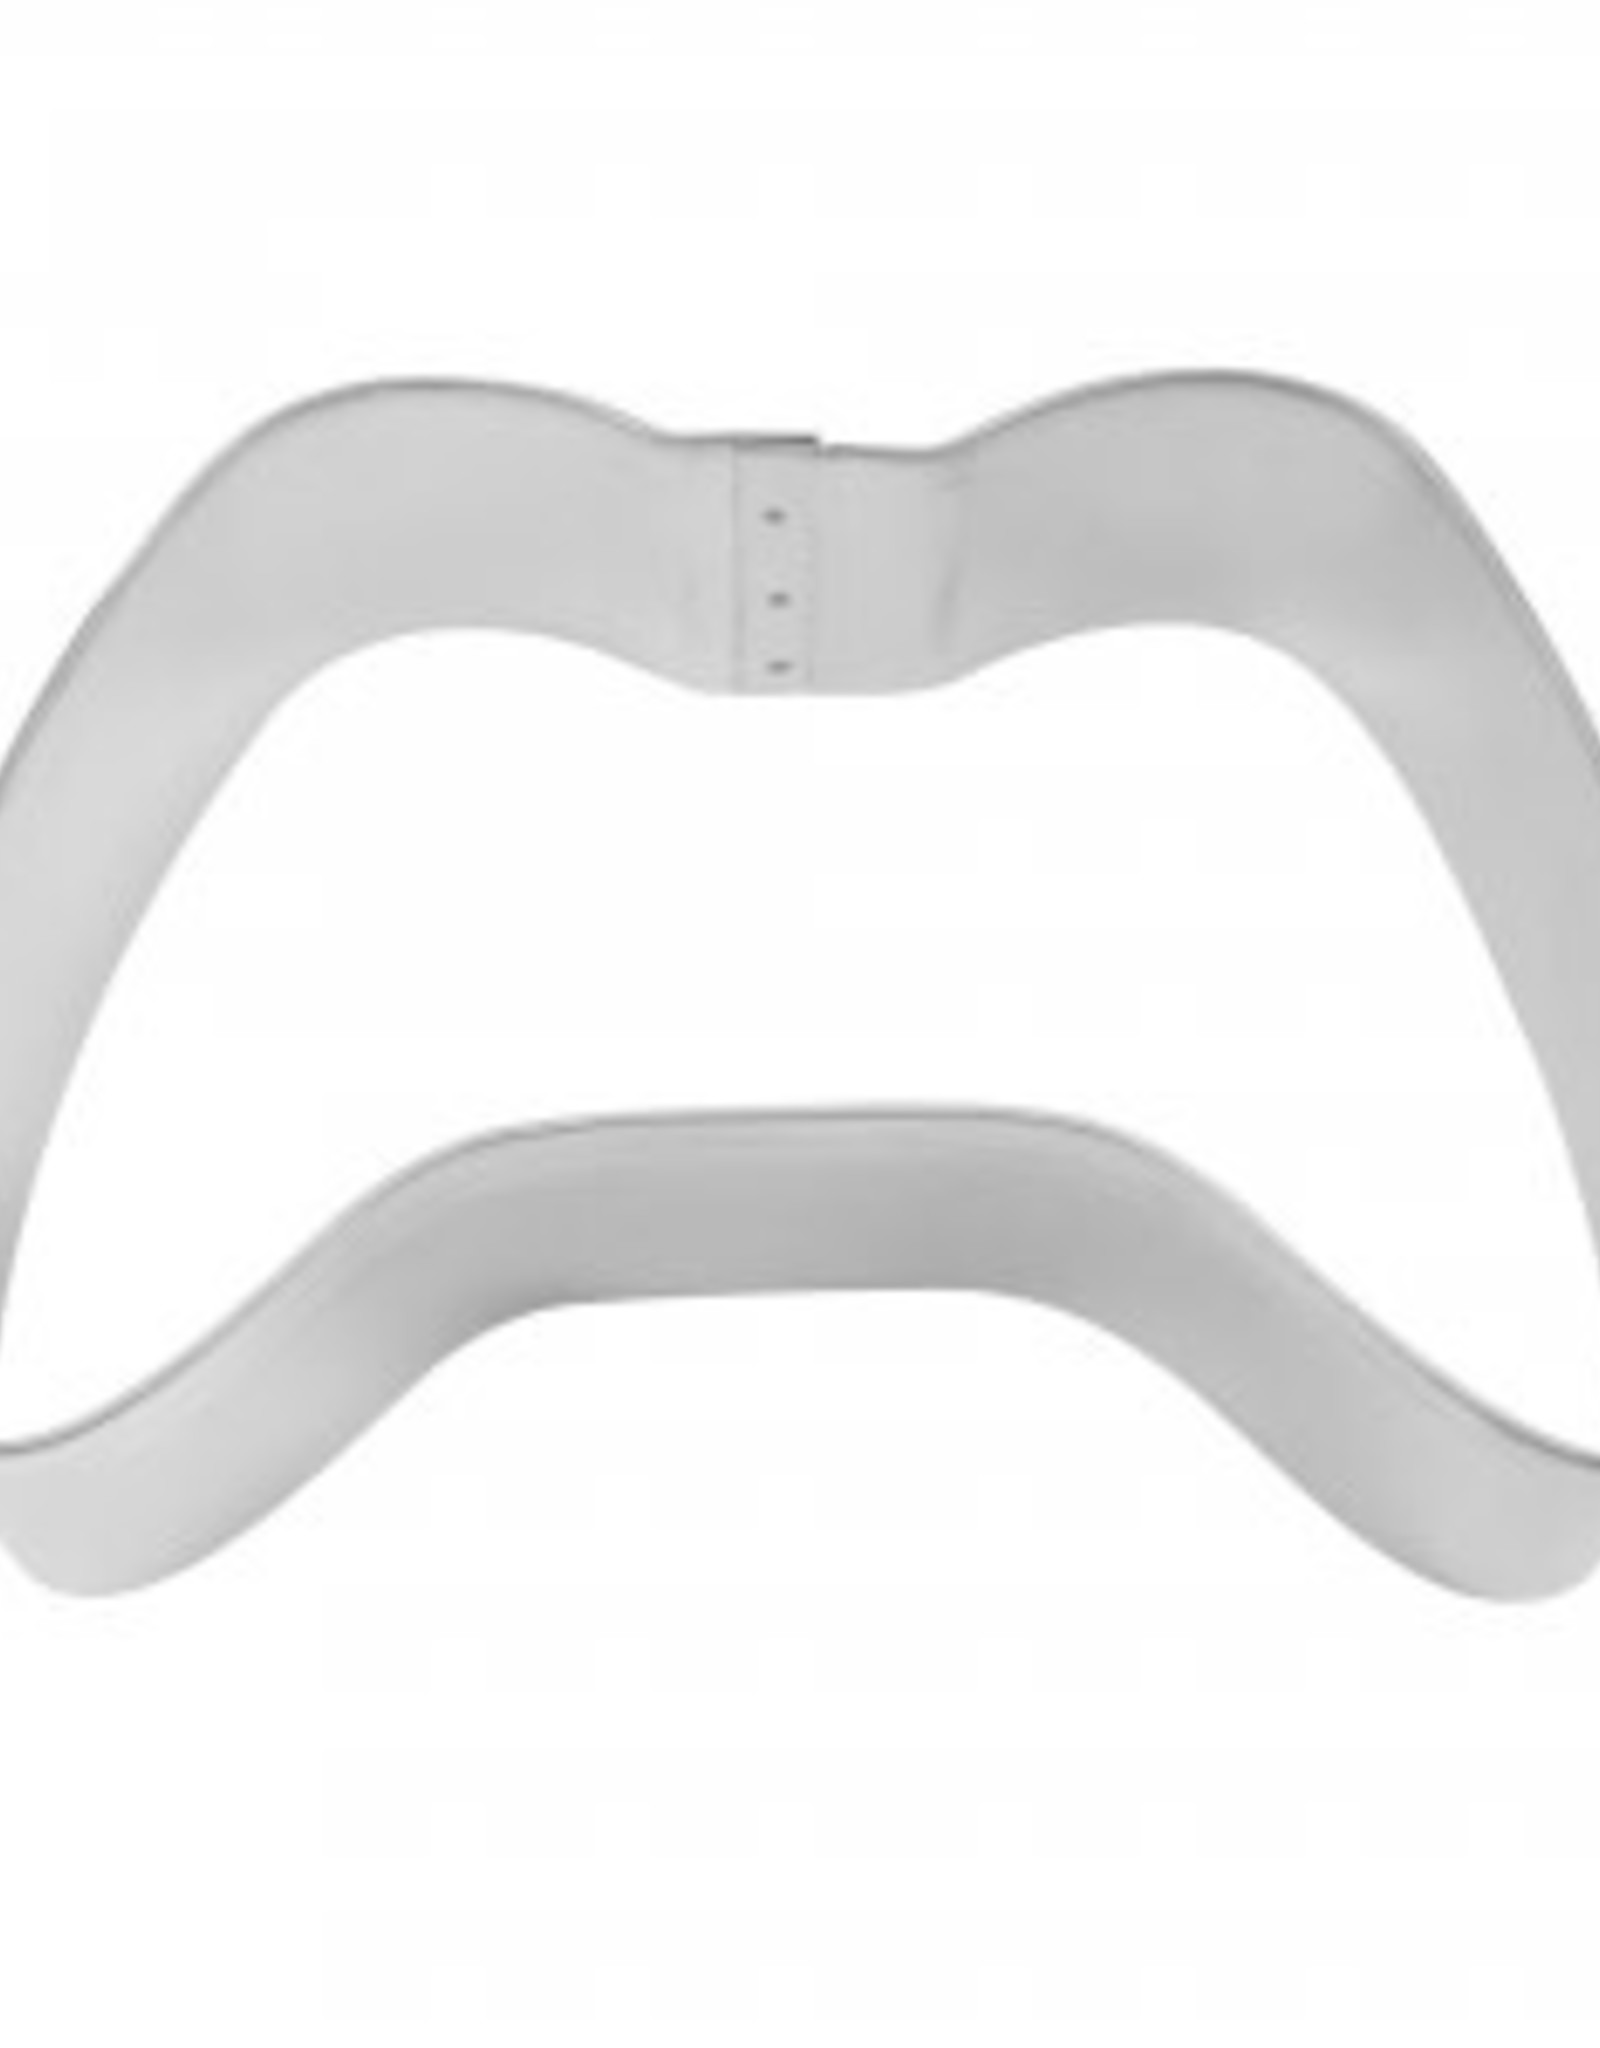 Game Controller Cookie Cutter (4")